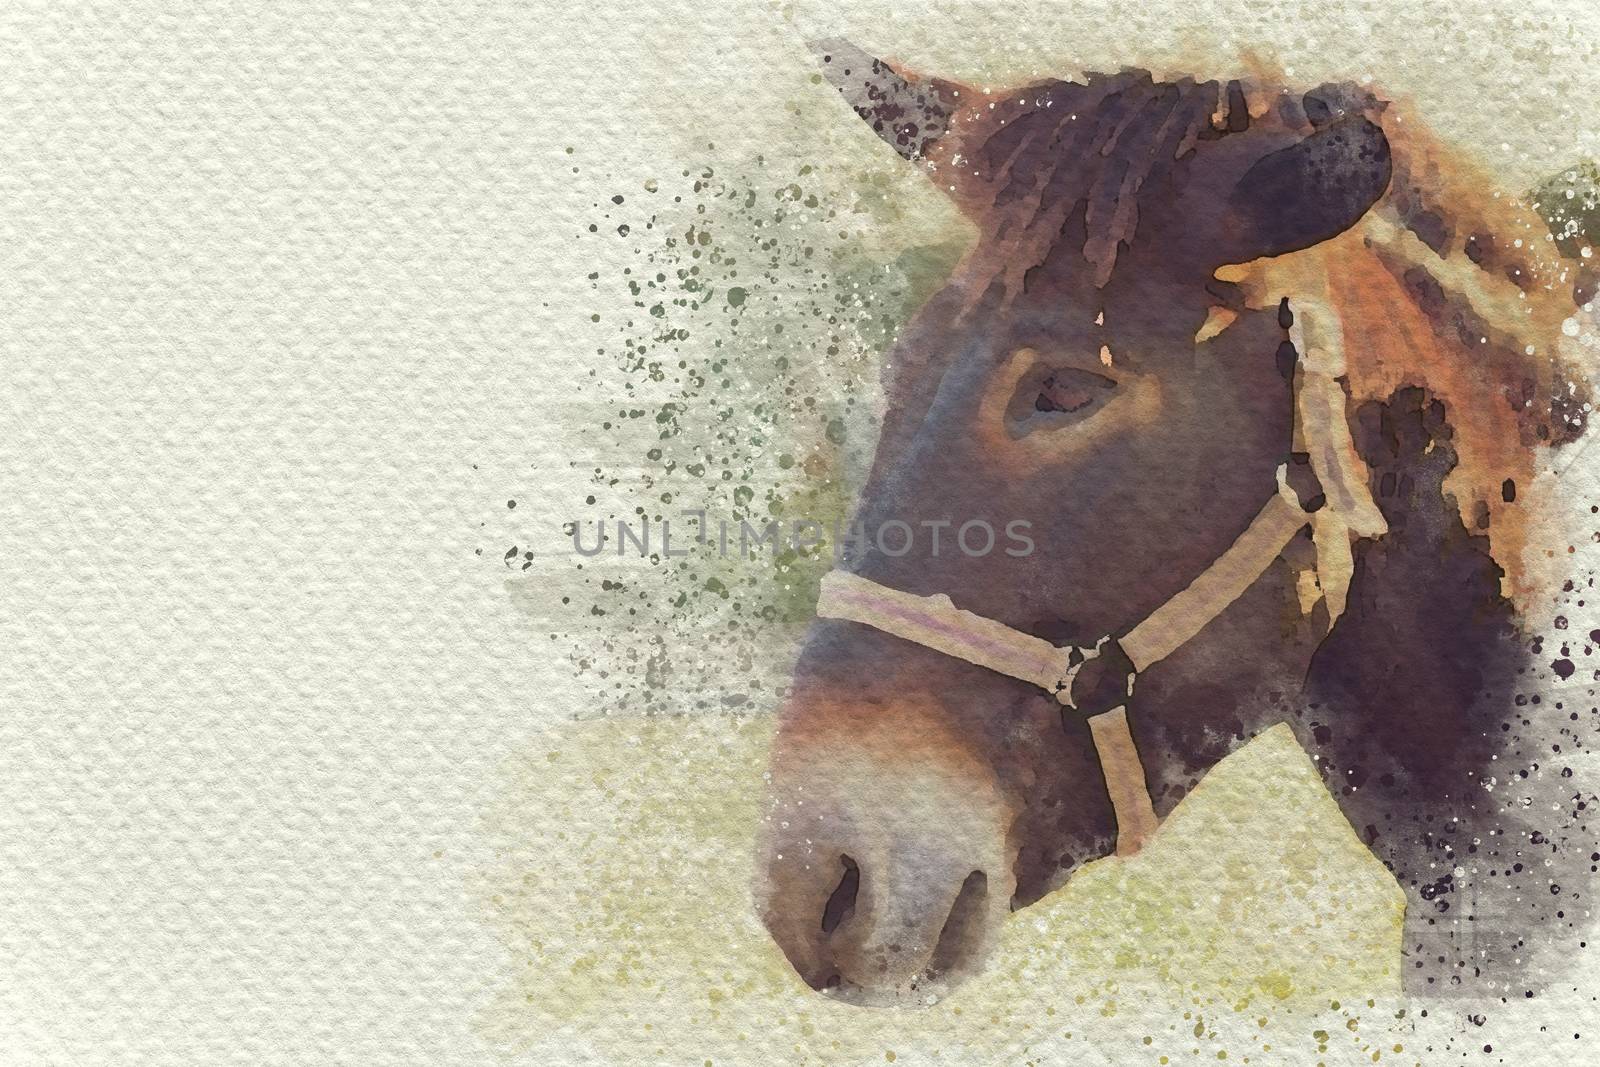 Horse in the farm. Closeup horse face. Digital watercolor painting effect. Copy space for text.